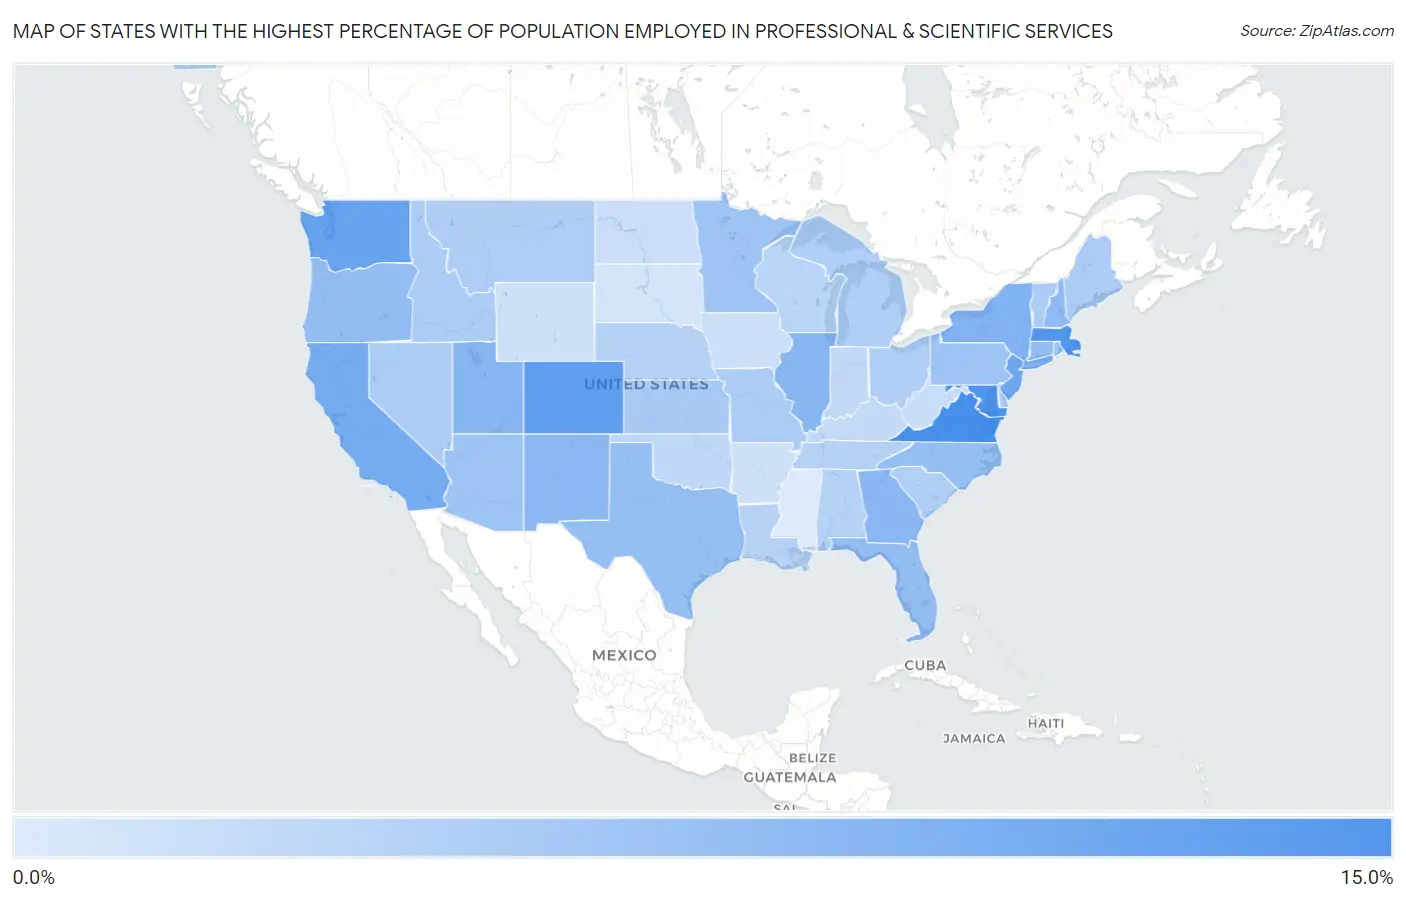 States with the Highest Percentage of Population Employed in Professional & Scientific Services in the United States Map